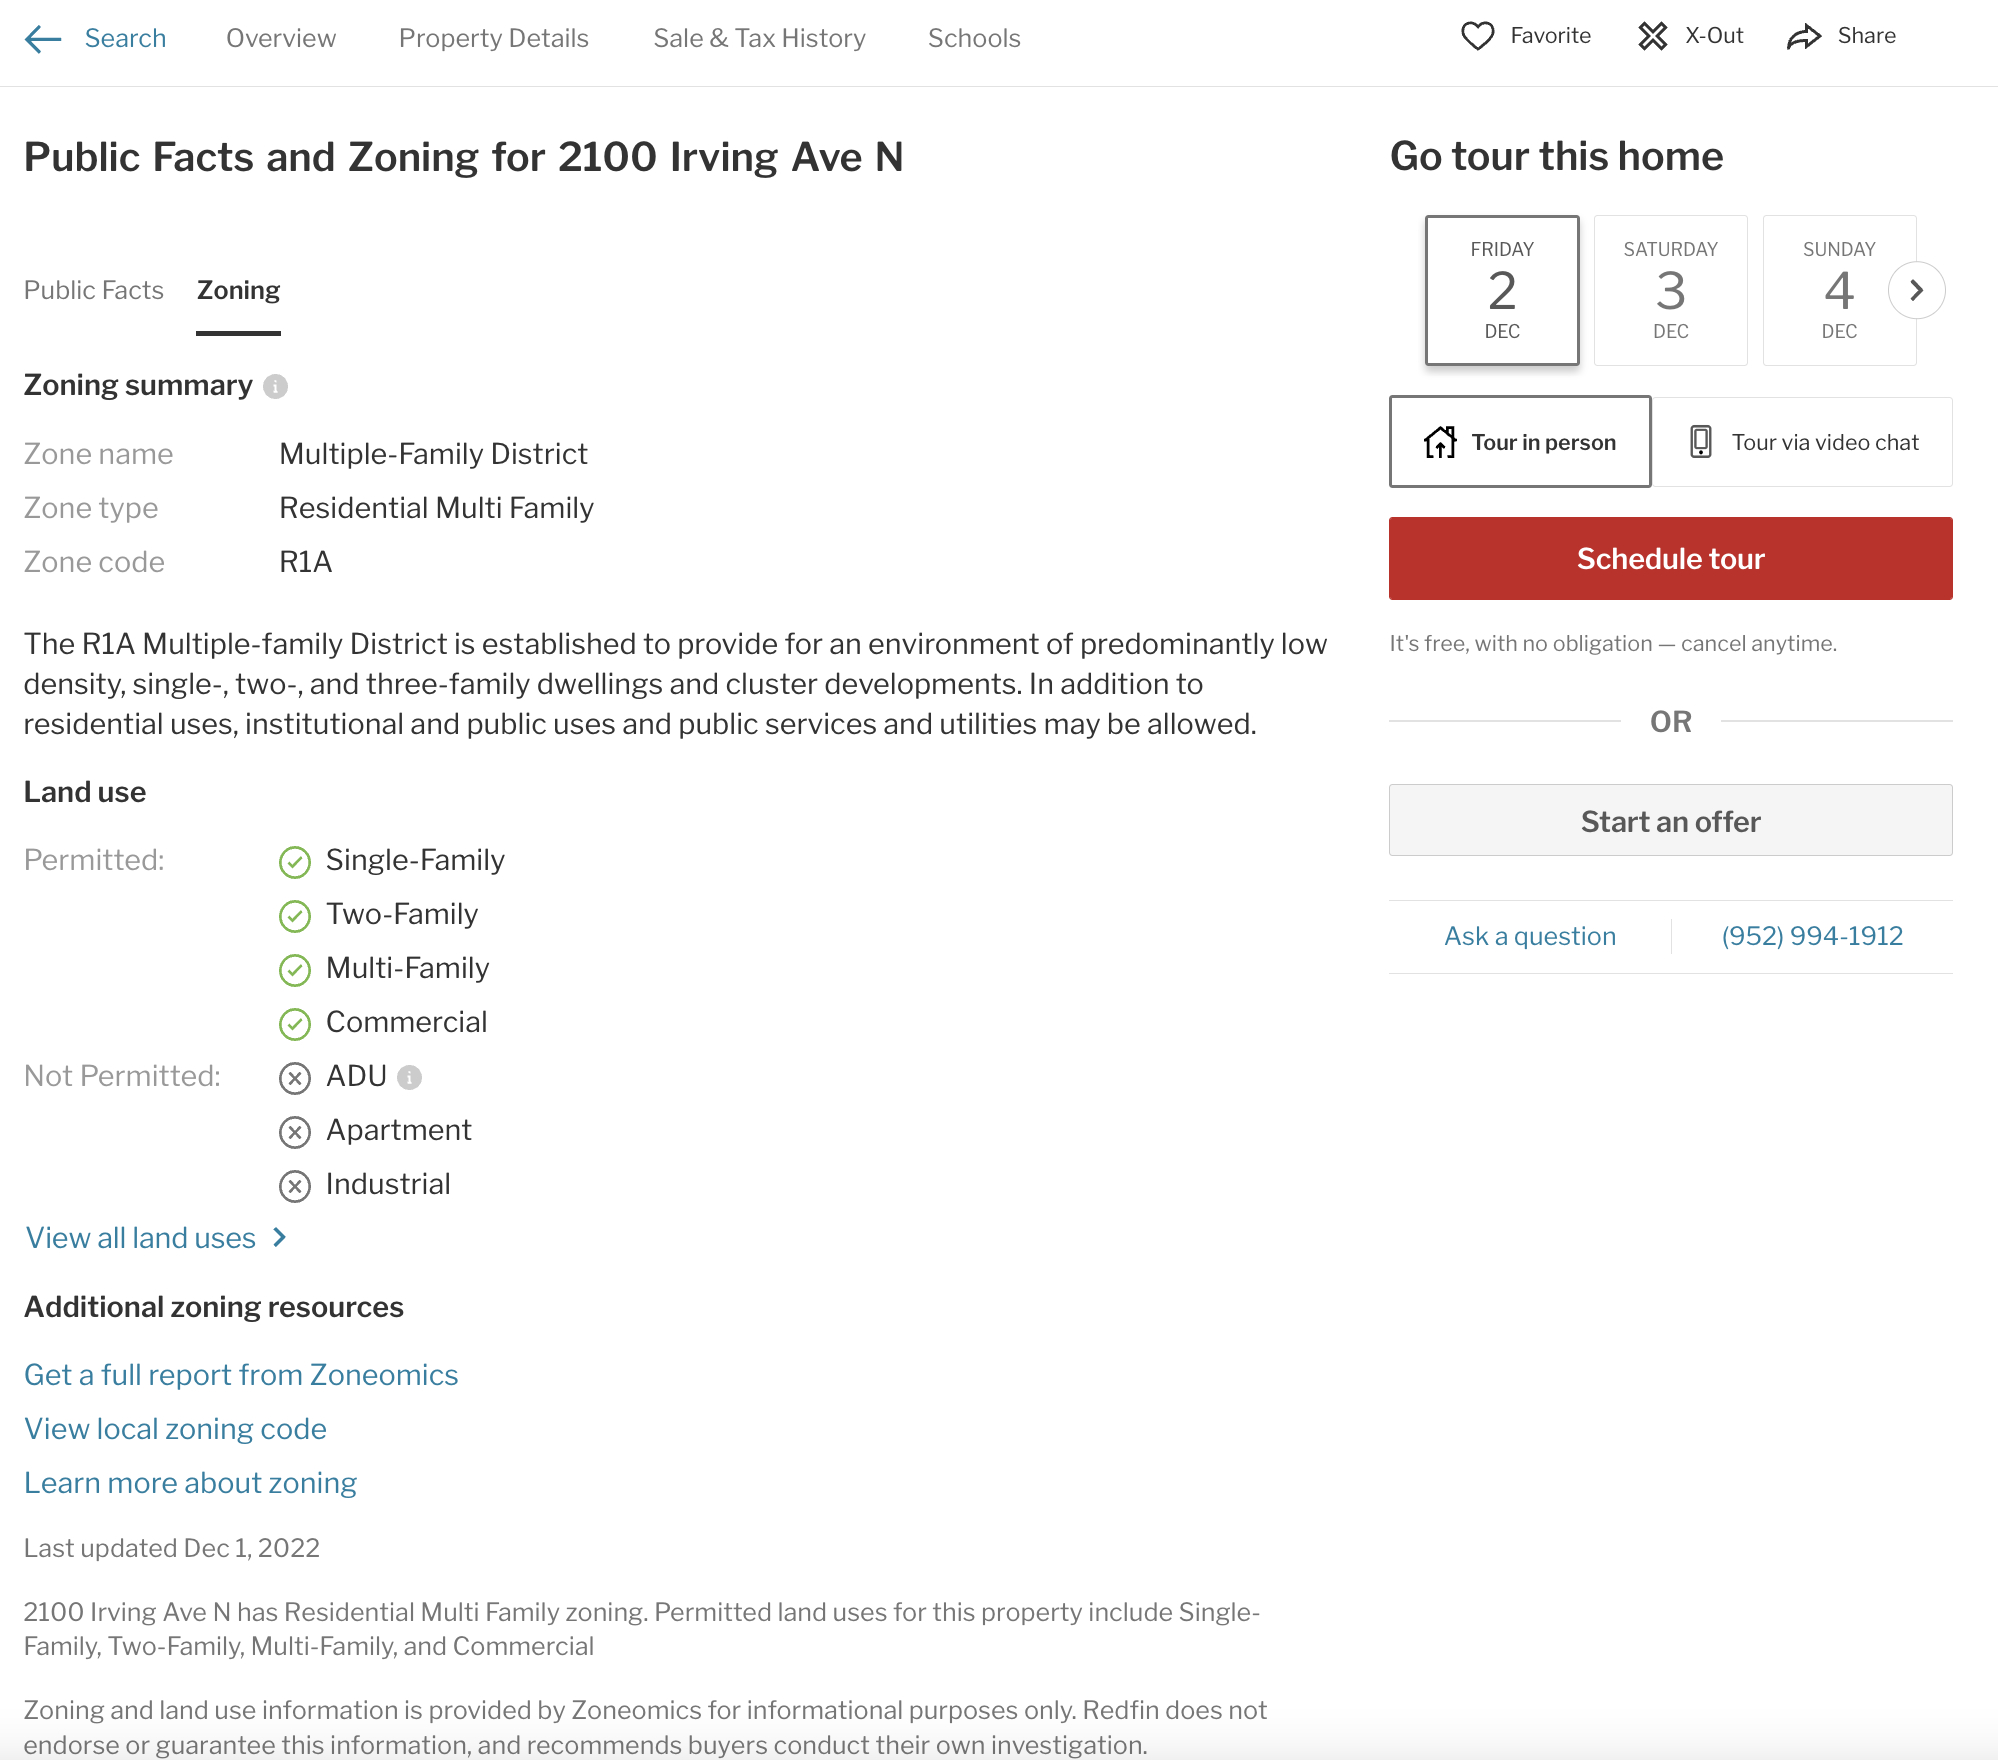 redfin adds zoning data